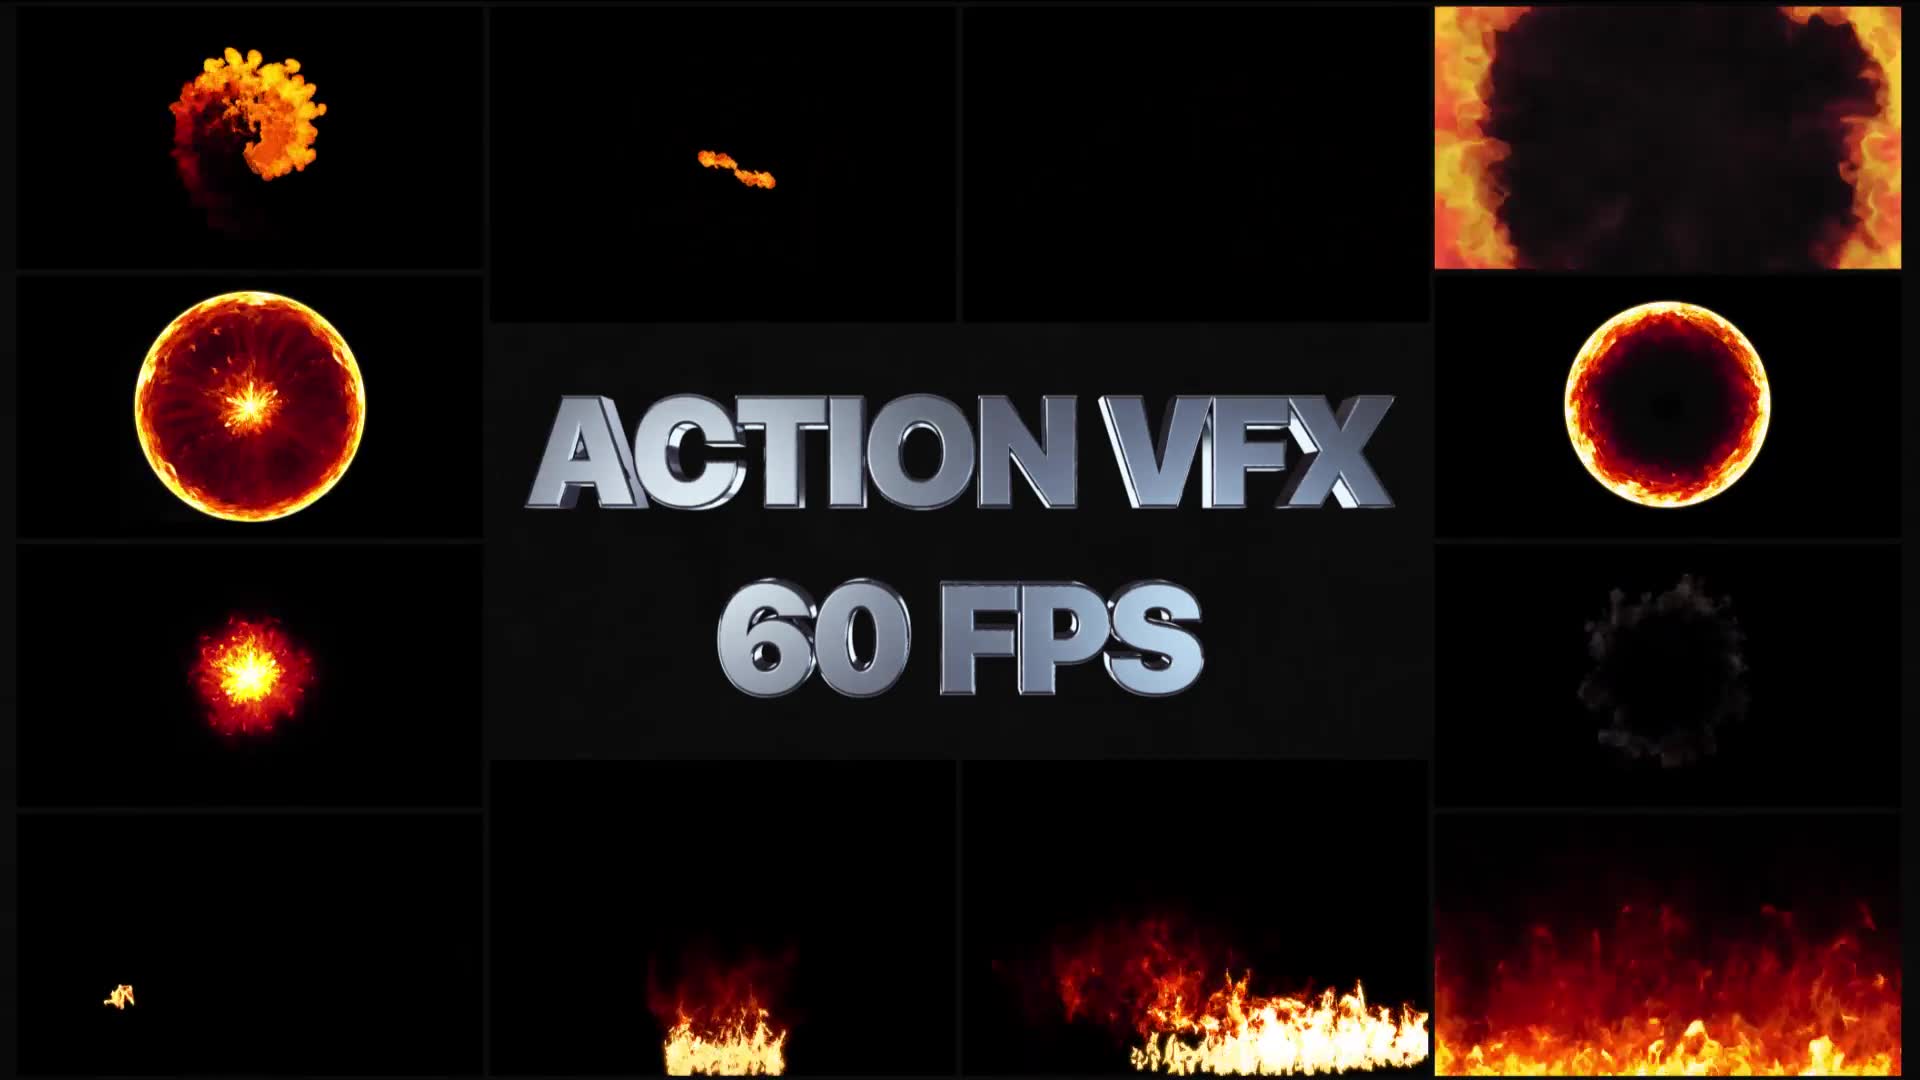 after effects fire project download